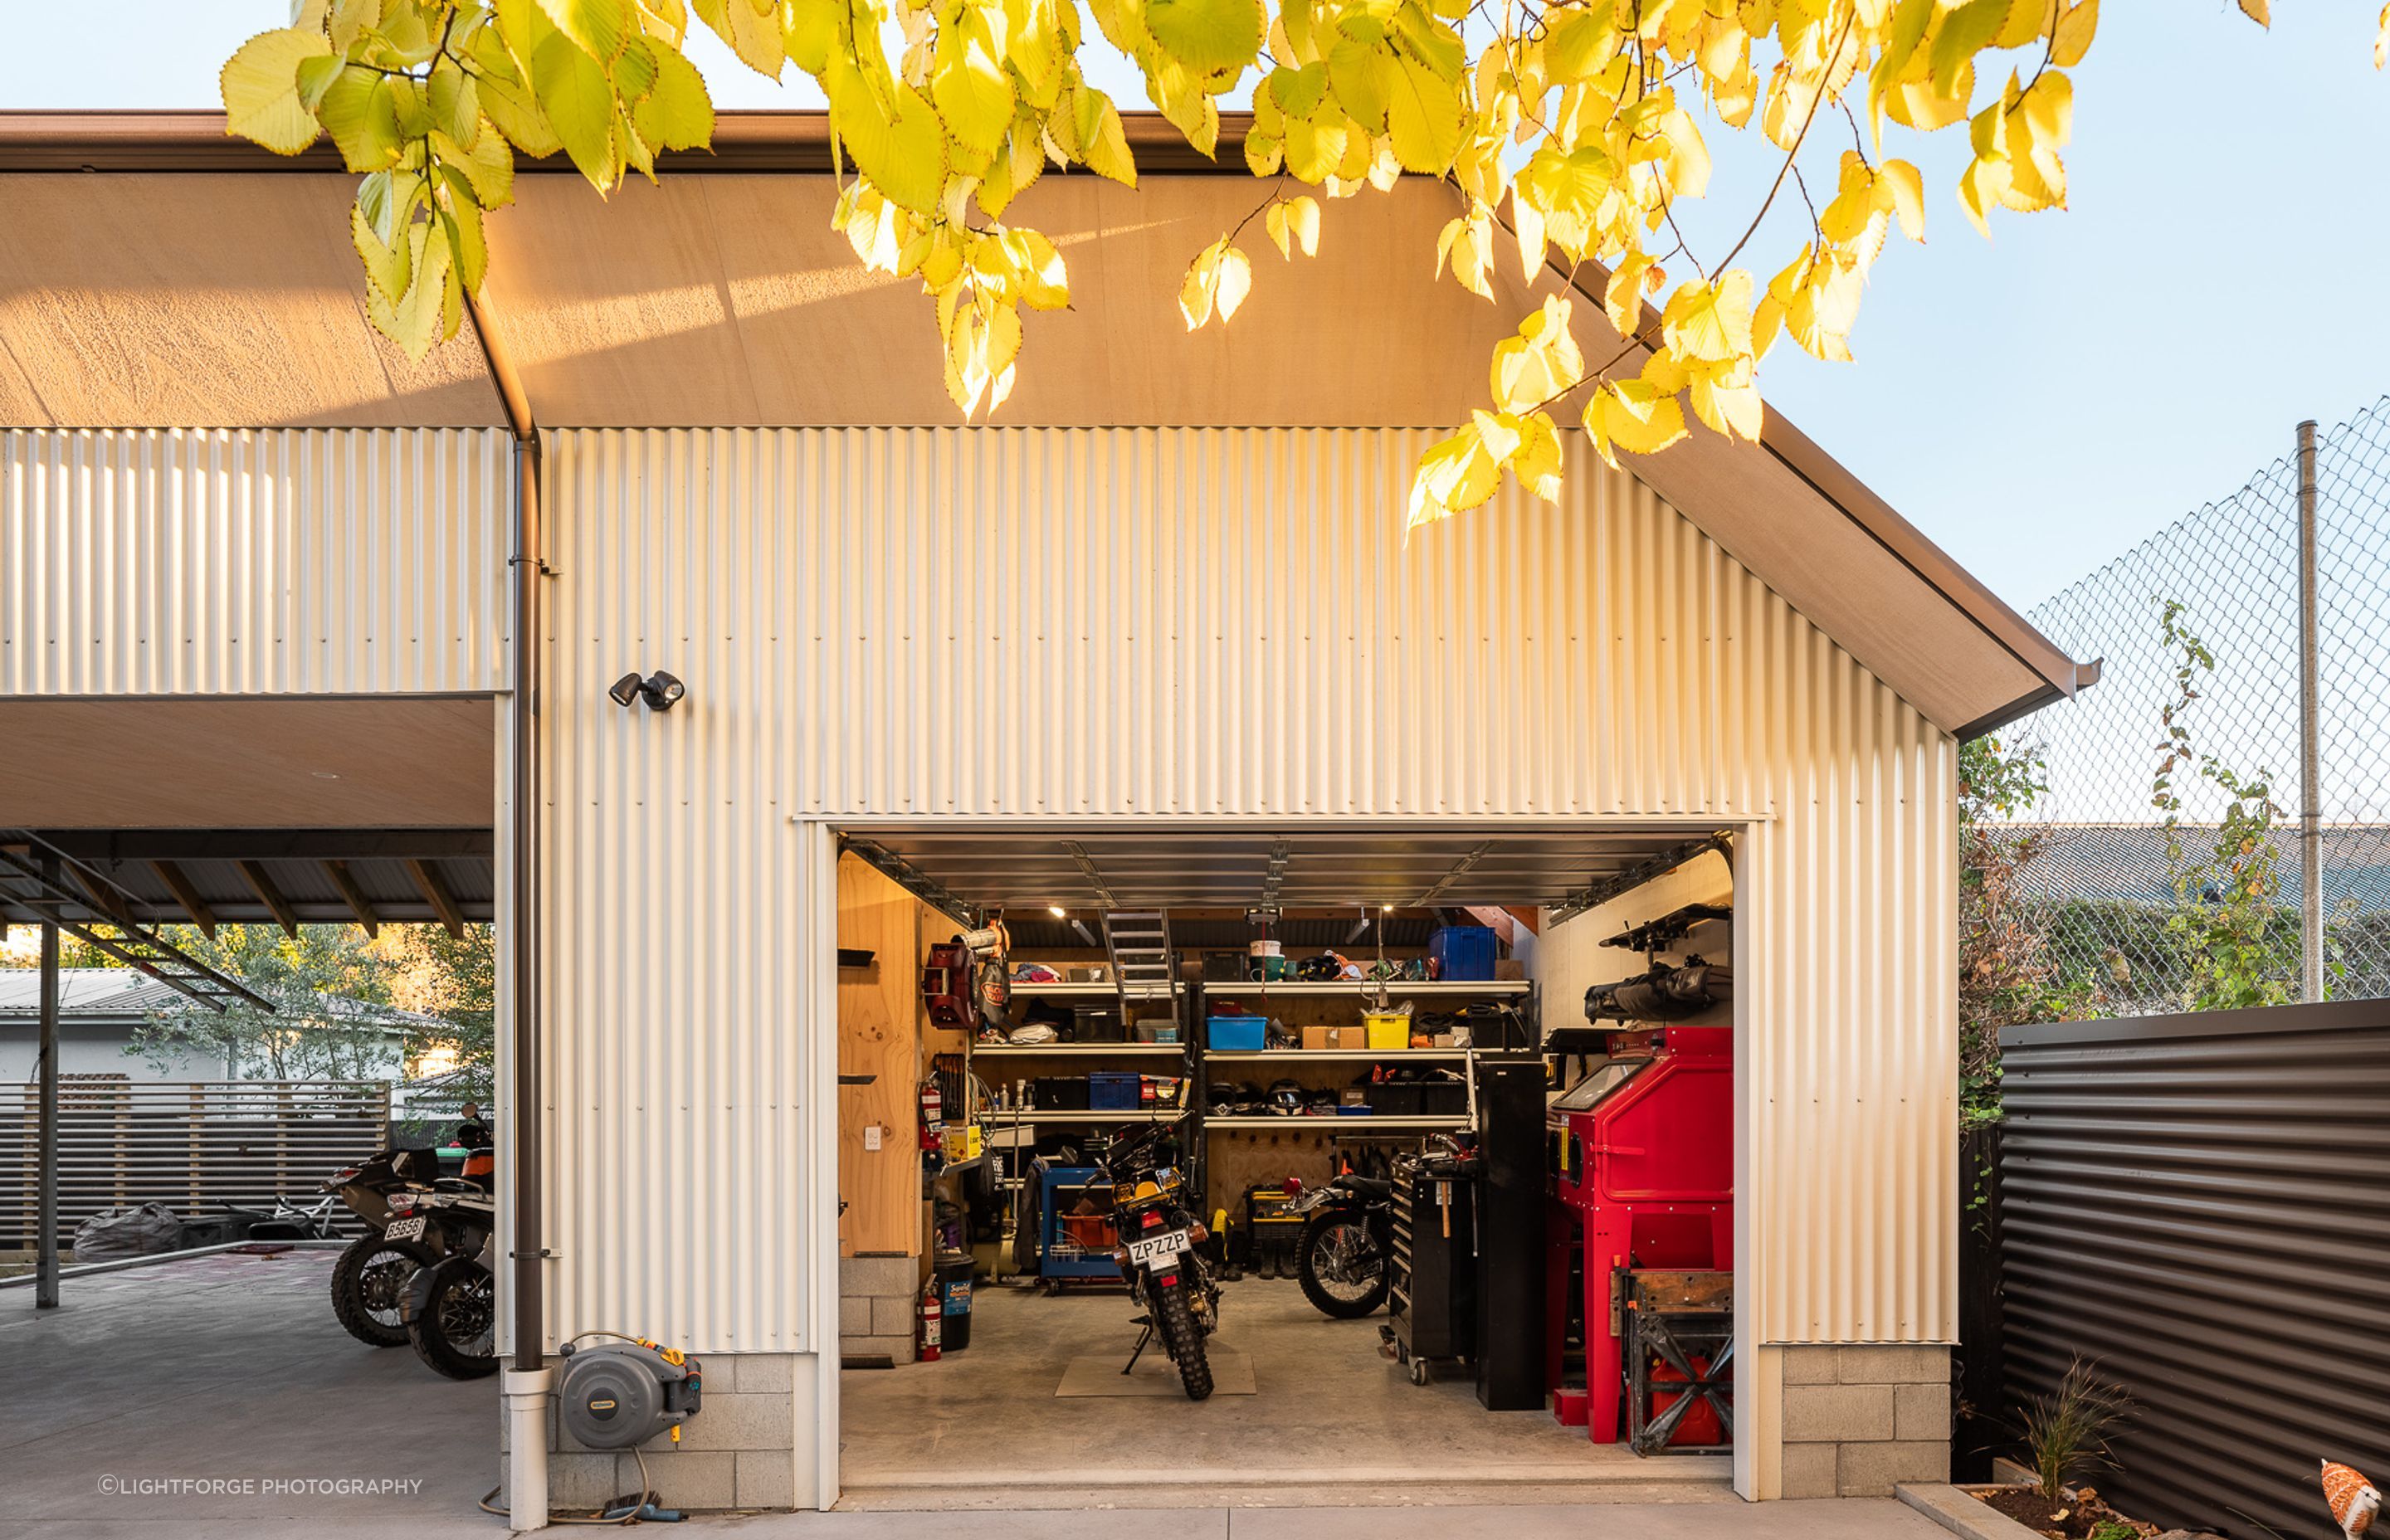 The motorcycle workshop at the back of the house.